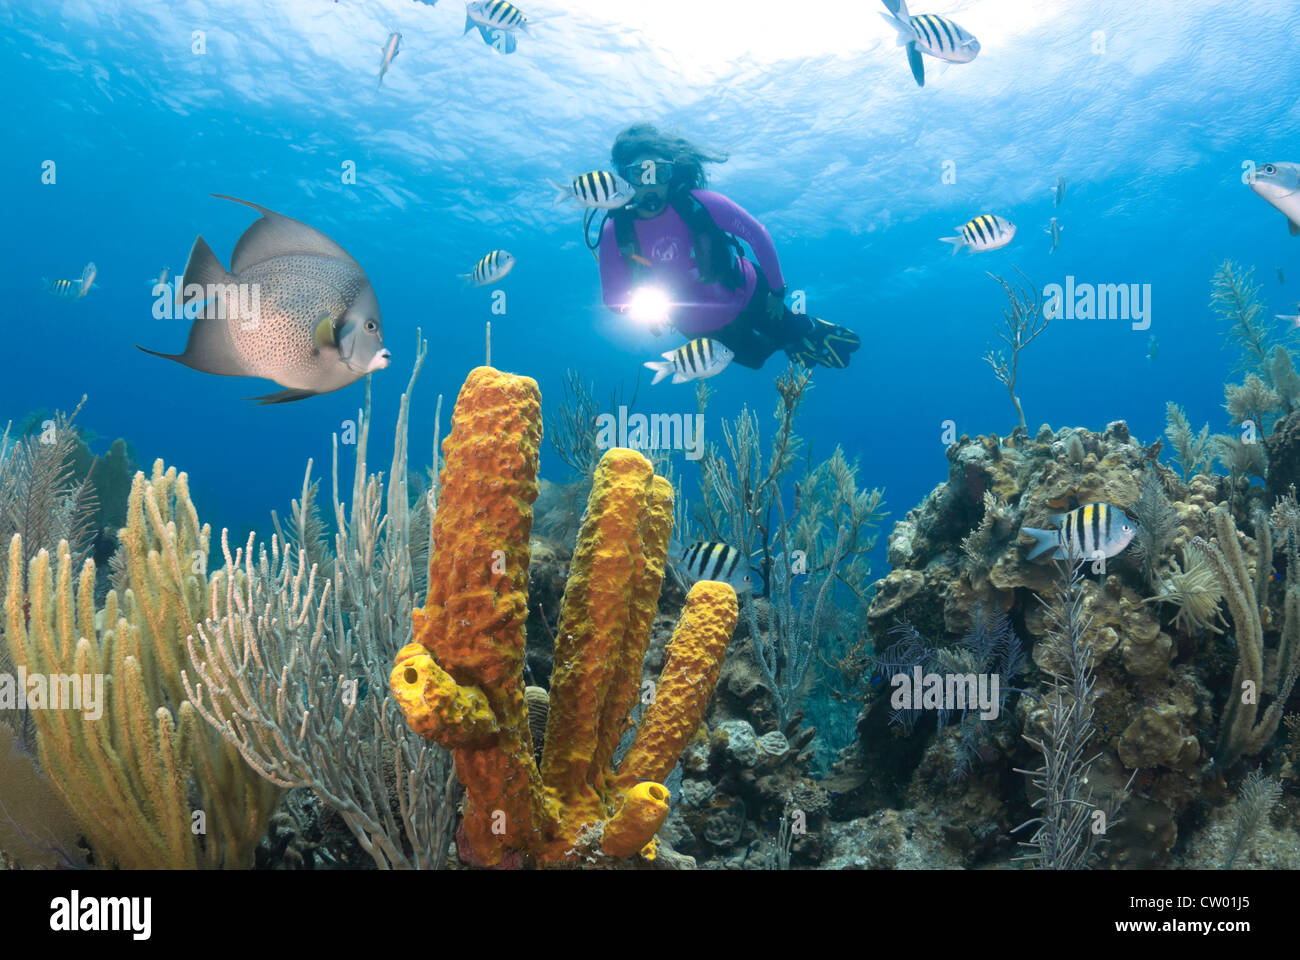 Scuba Diver swimming over tropical coral reef with Queen Angelfish (Holacanthus ciliaris) and Sponges Stock Photo